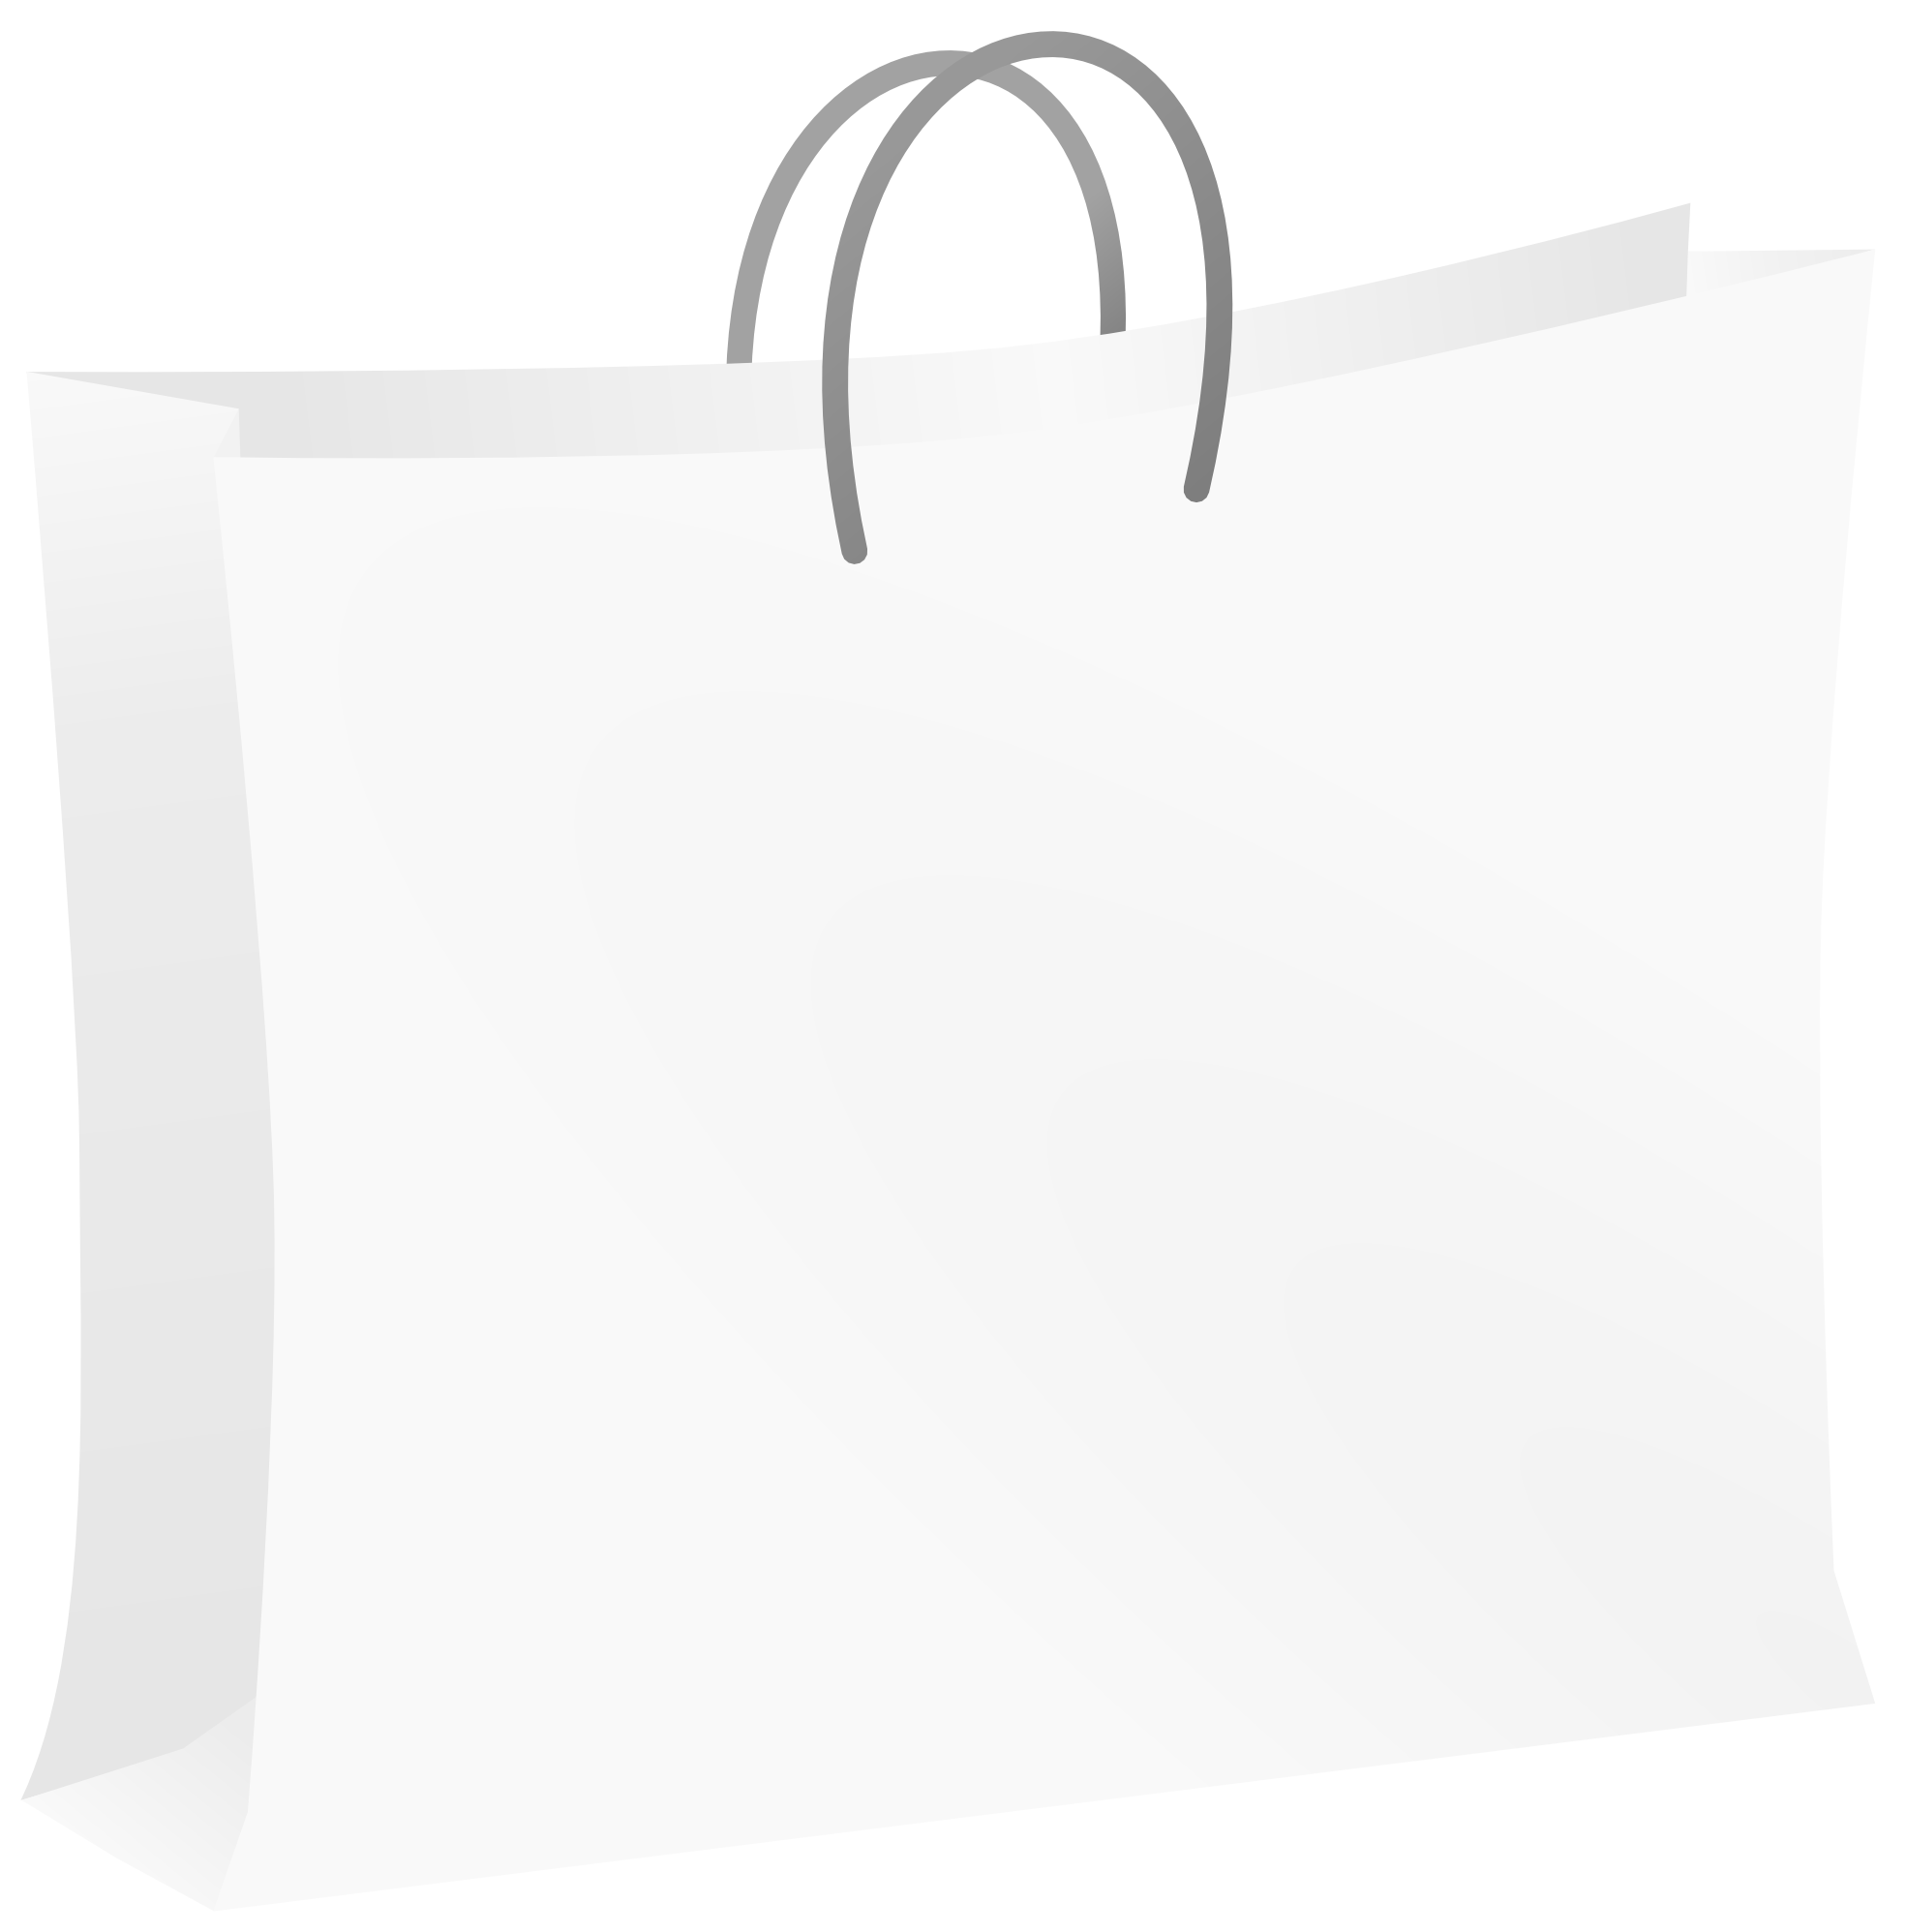 Shopping Bag Clipart | Free Download Clip Art | Free Clip Art | on ...